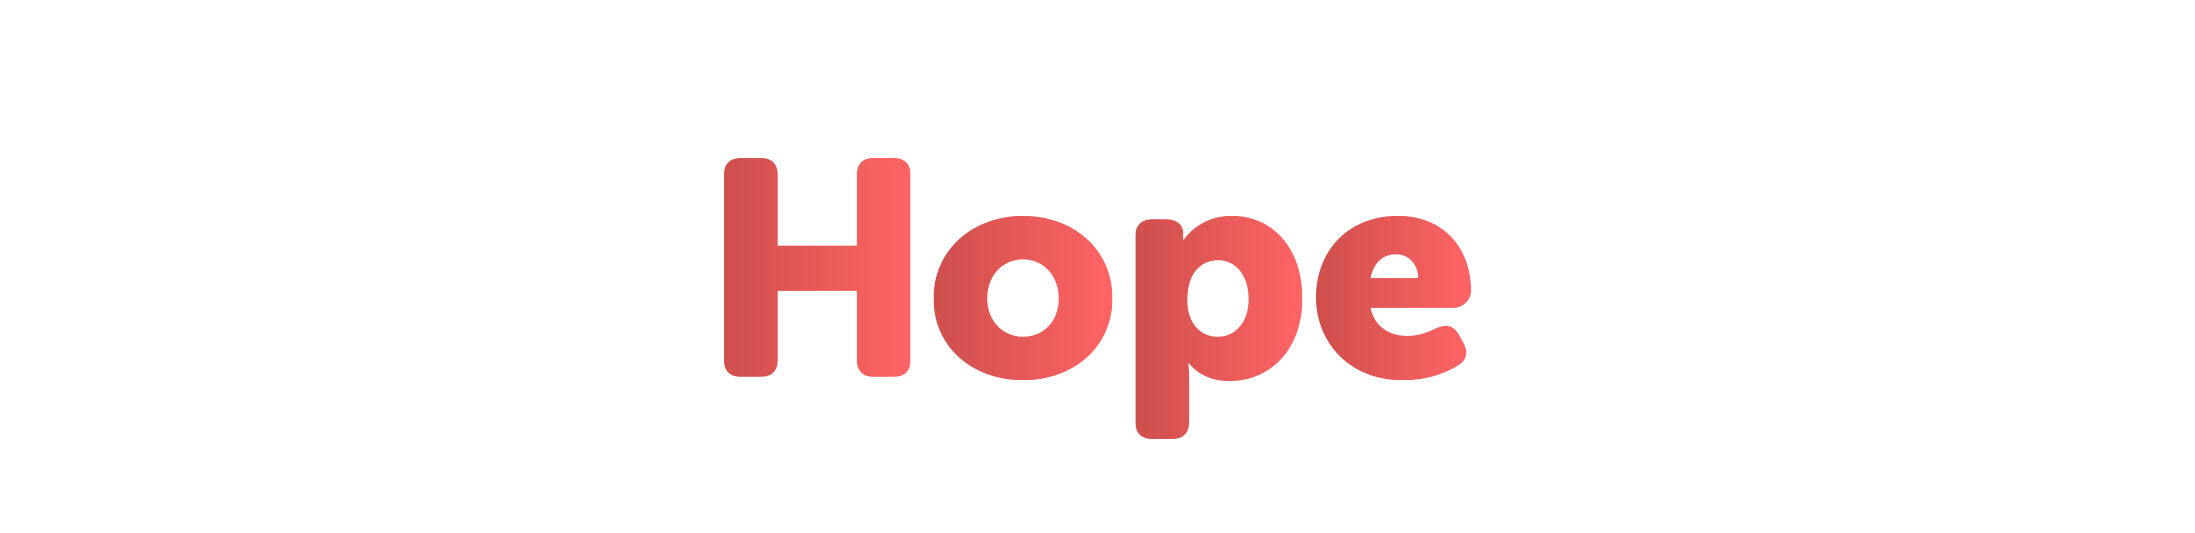 HOPE.png